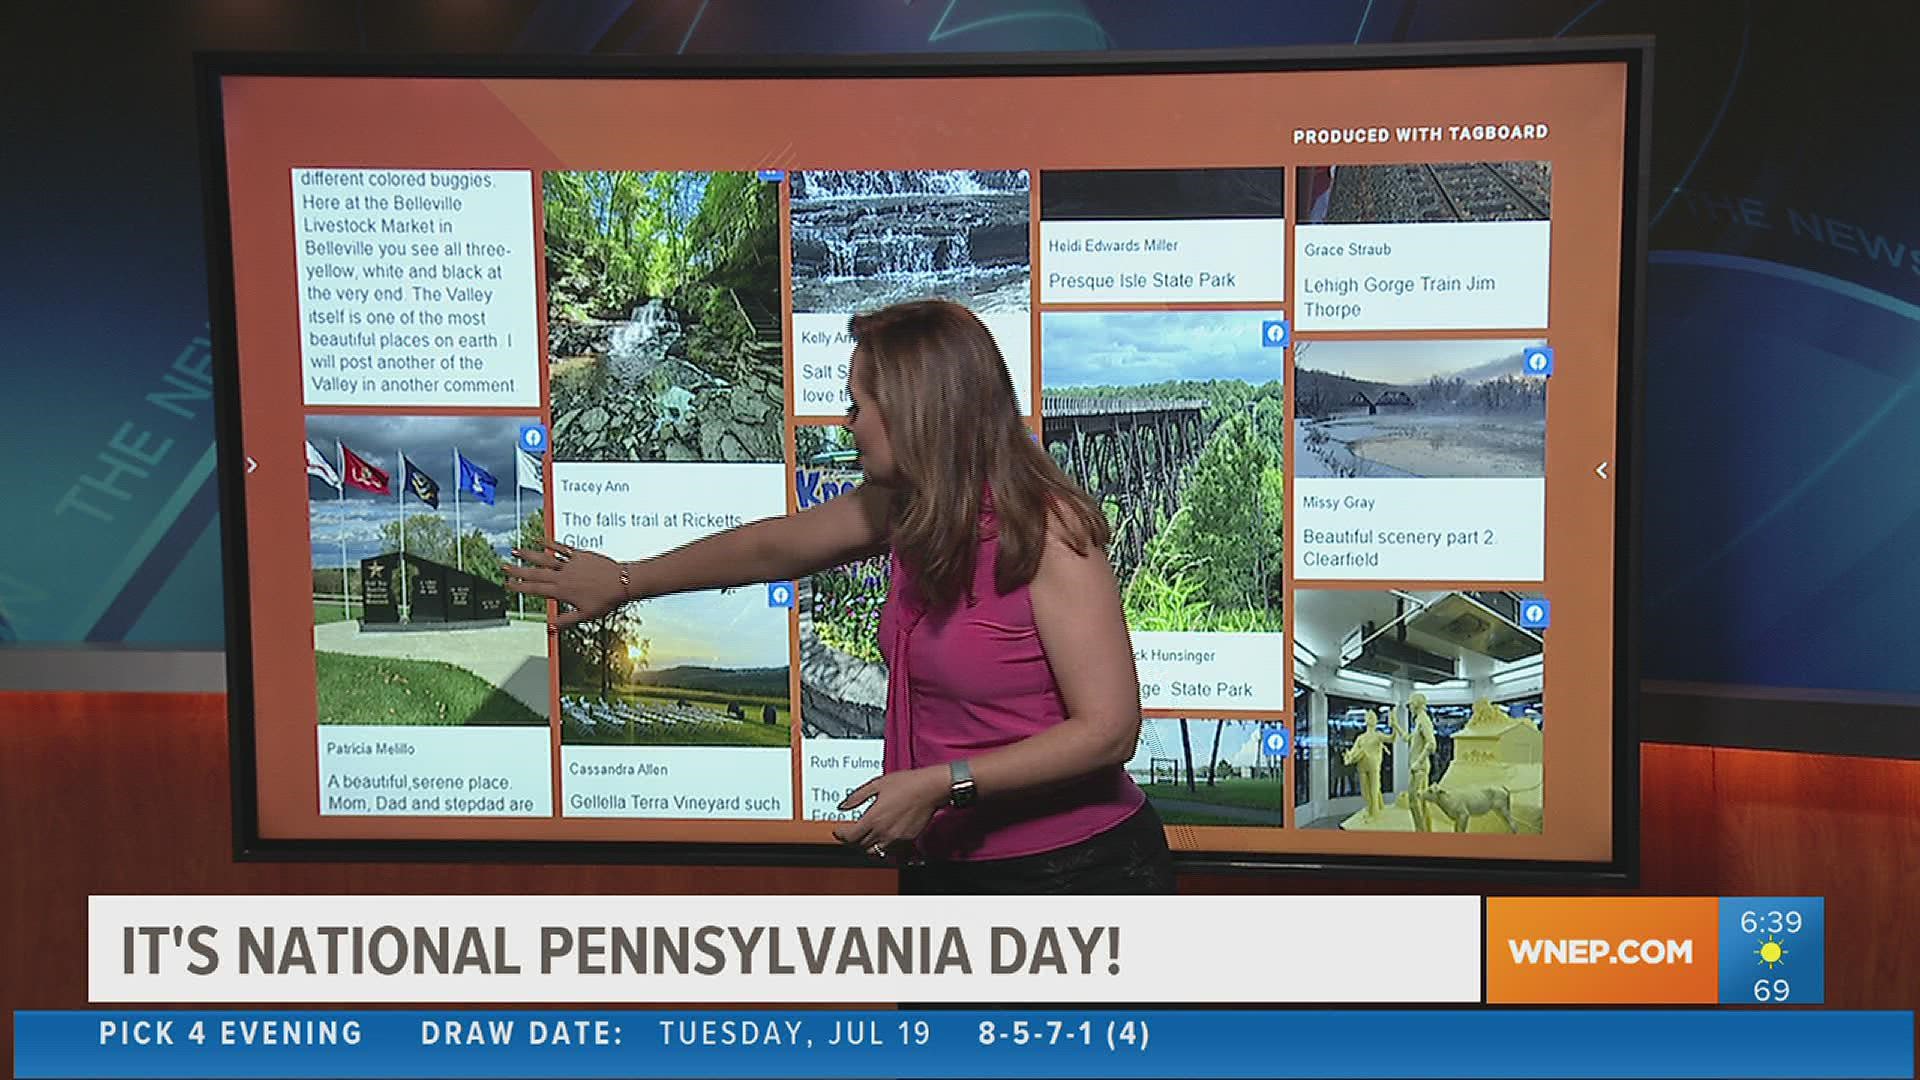 Today is National Pennsylvania Day, a day to recognize PA's place in history and honor its beauty and culture. So, viewers shared their favorite things about PA.